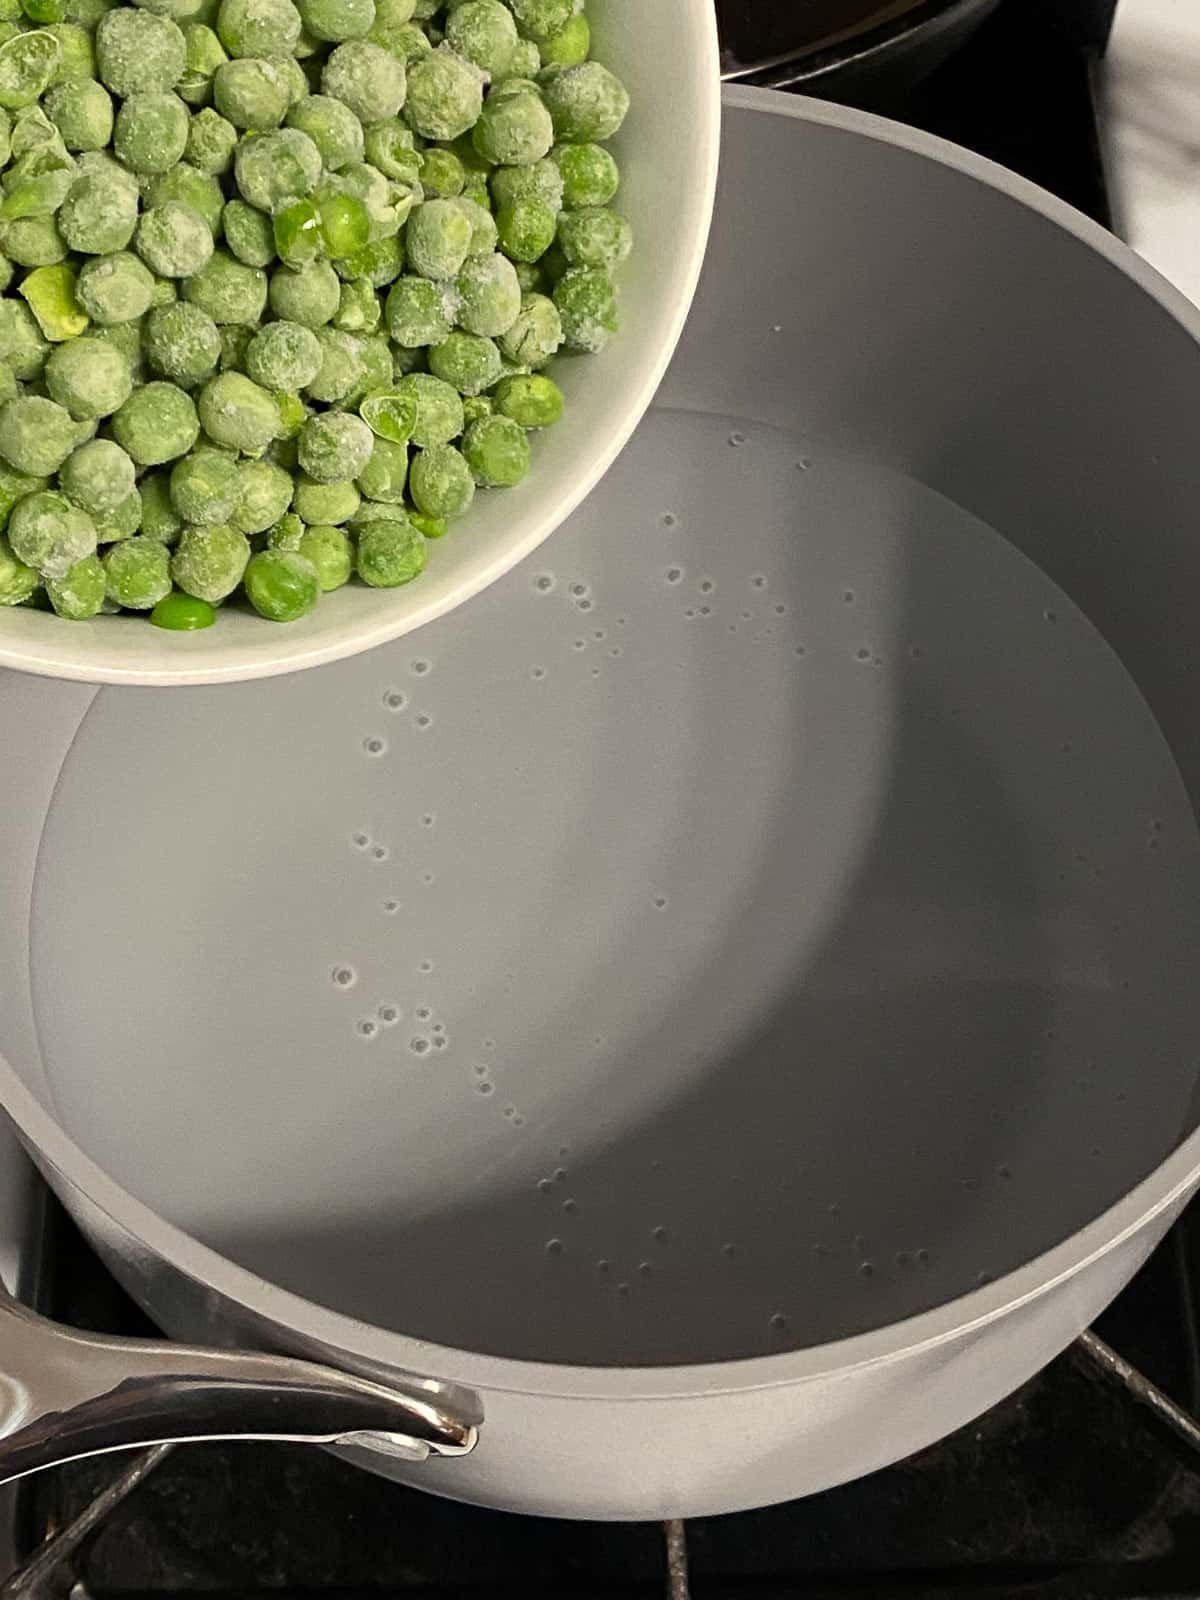 process of adding peas to a pot of water